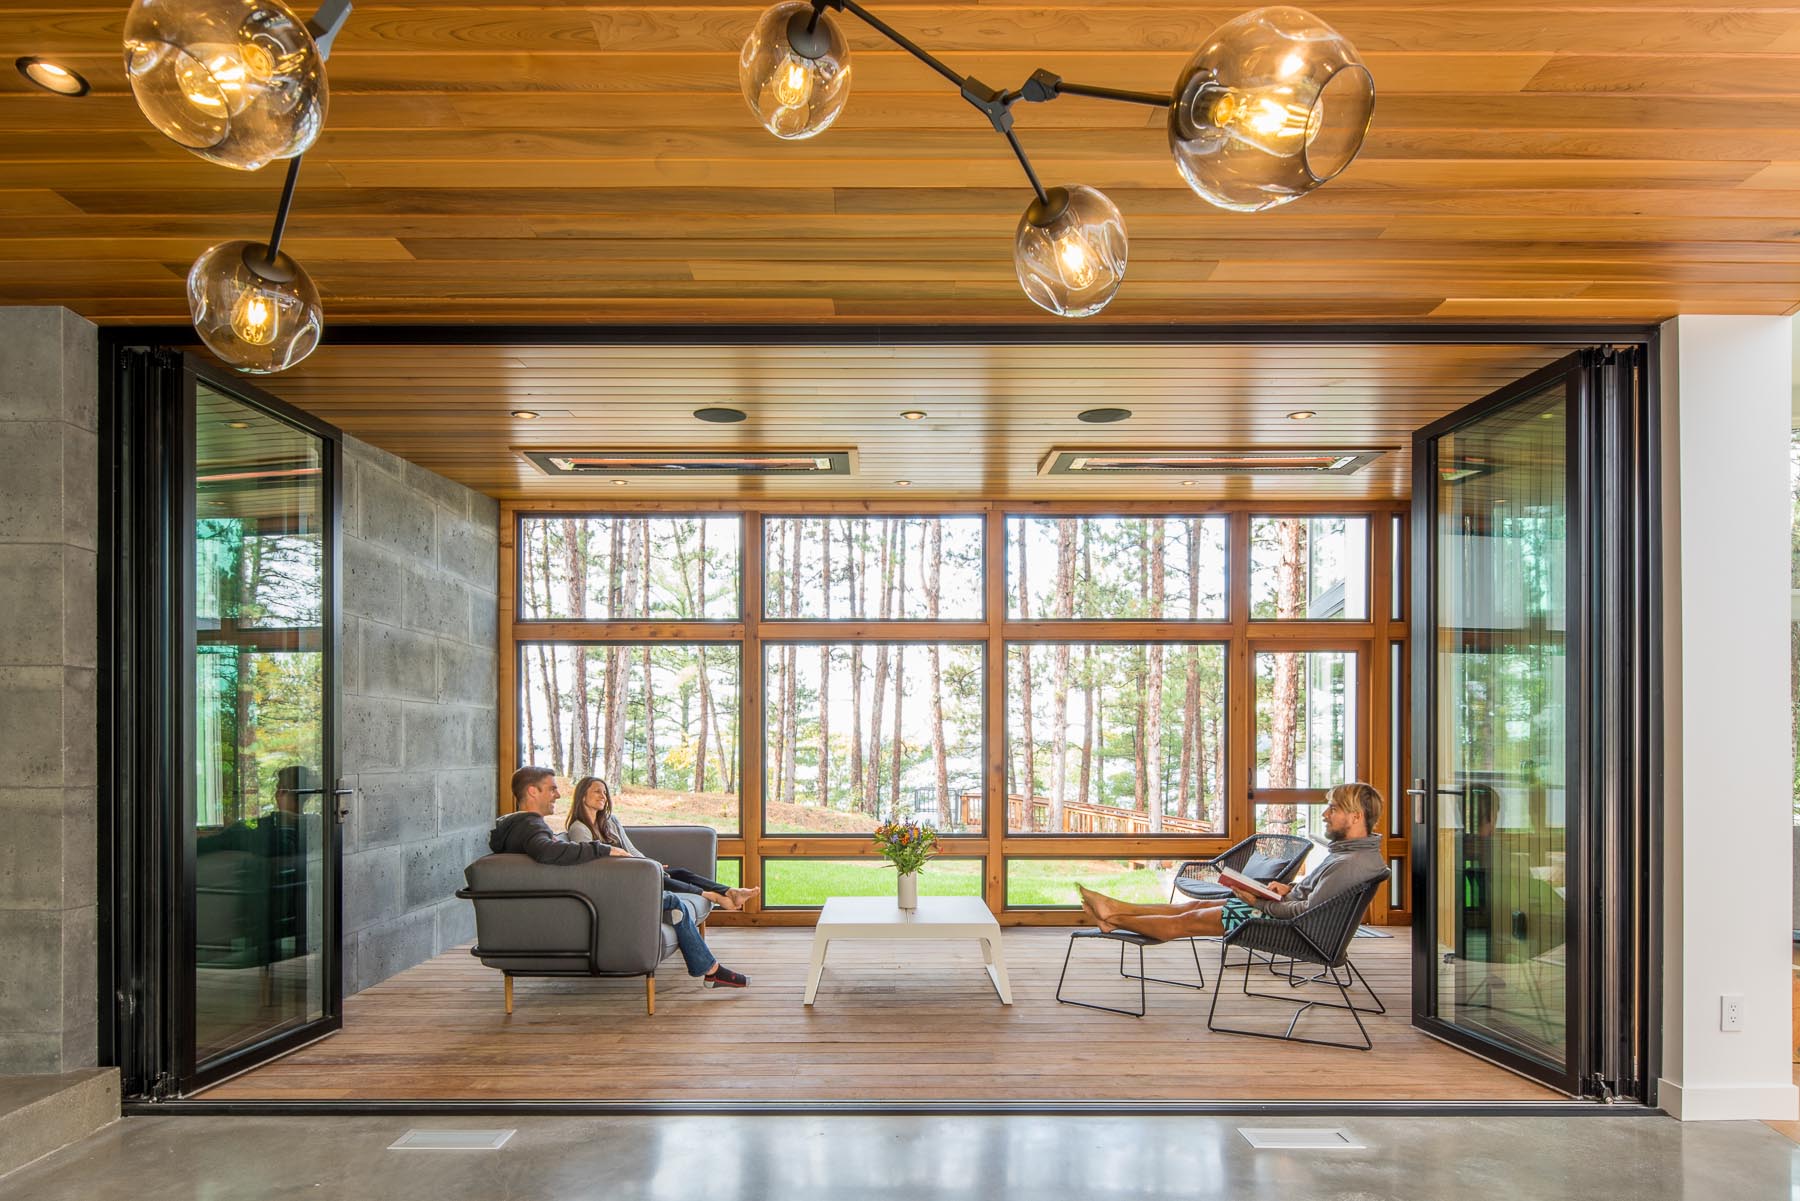 A 3-season porch with opening glass wall system in Minnesota home. 